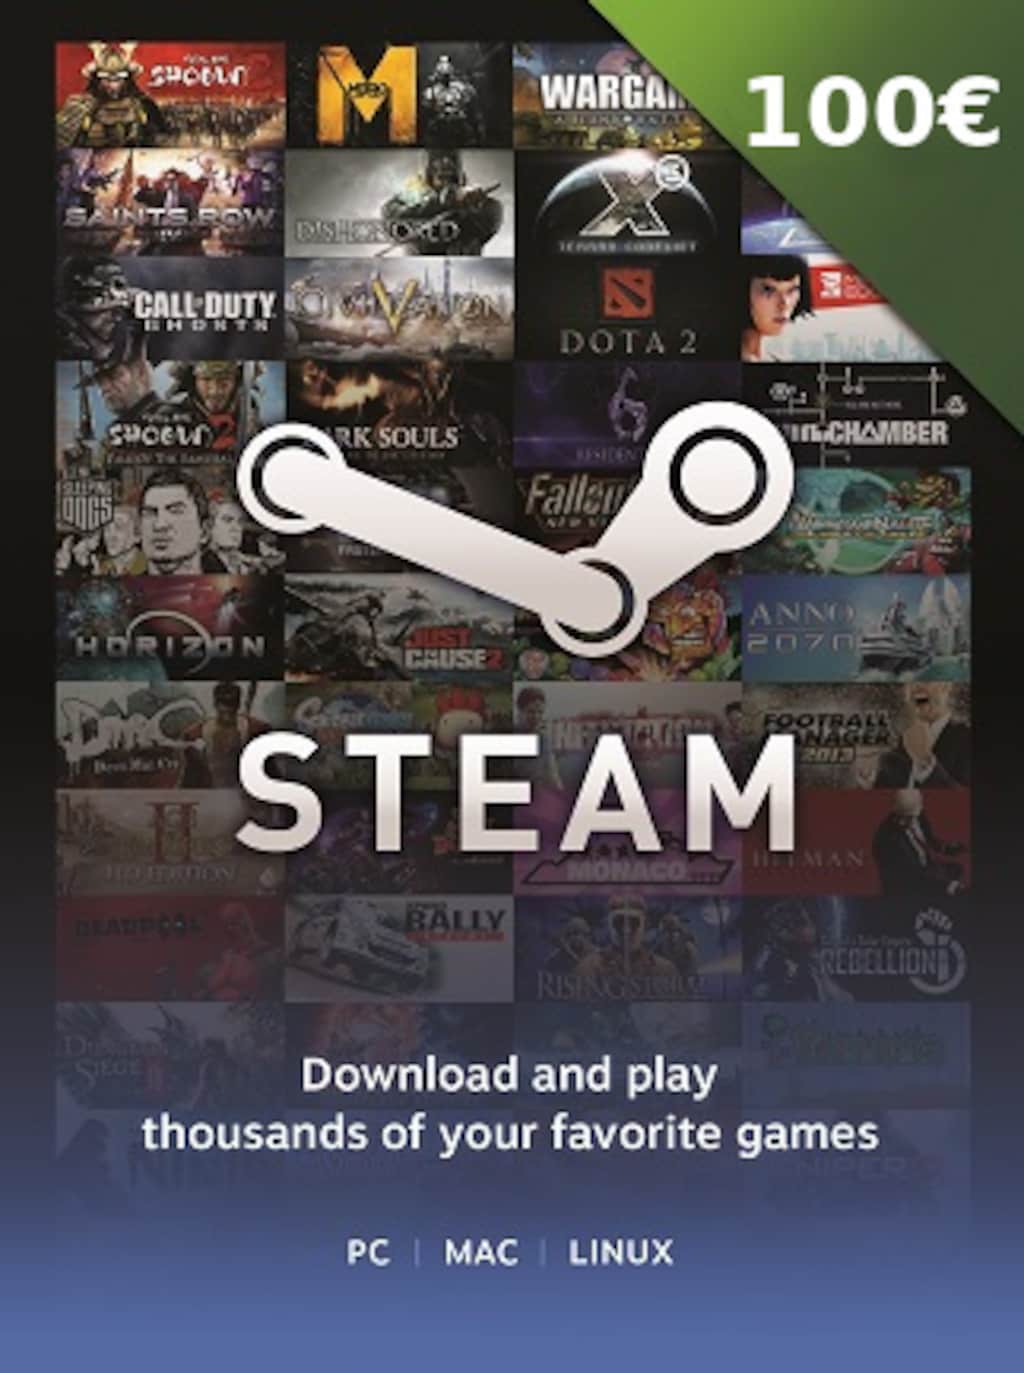 Card cheaper 20 - USD Steam Buy on Gift